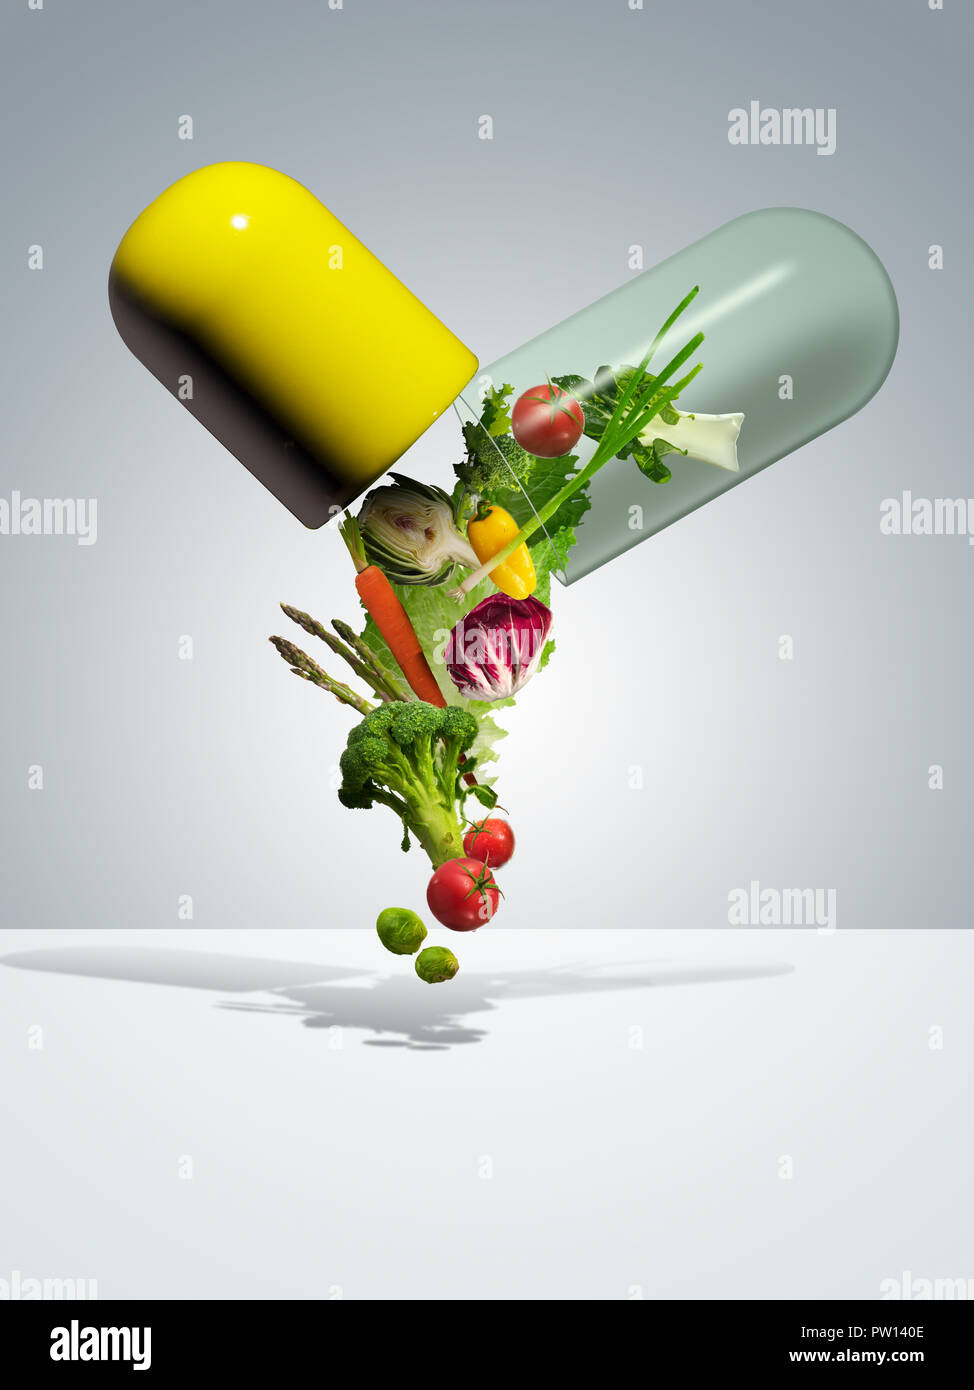 Concept A Yellow Pill Filled with Falling Vegetables, Healthy Eating, Nutritional, Eat your Vegetable, Prescription Diet, Food Group Stock Photo